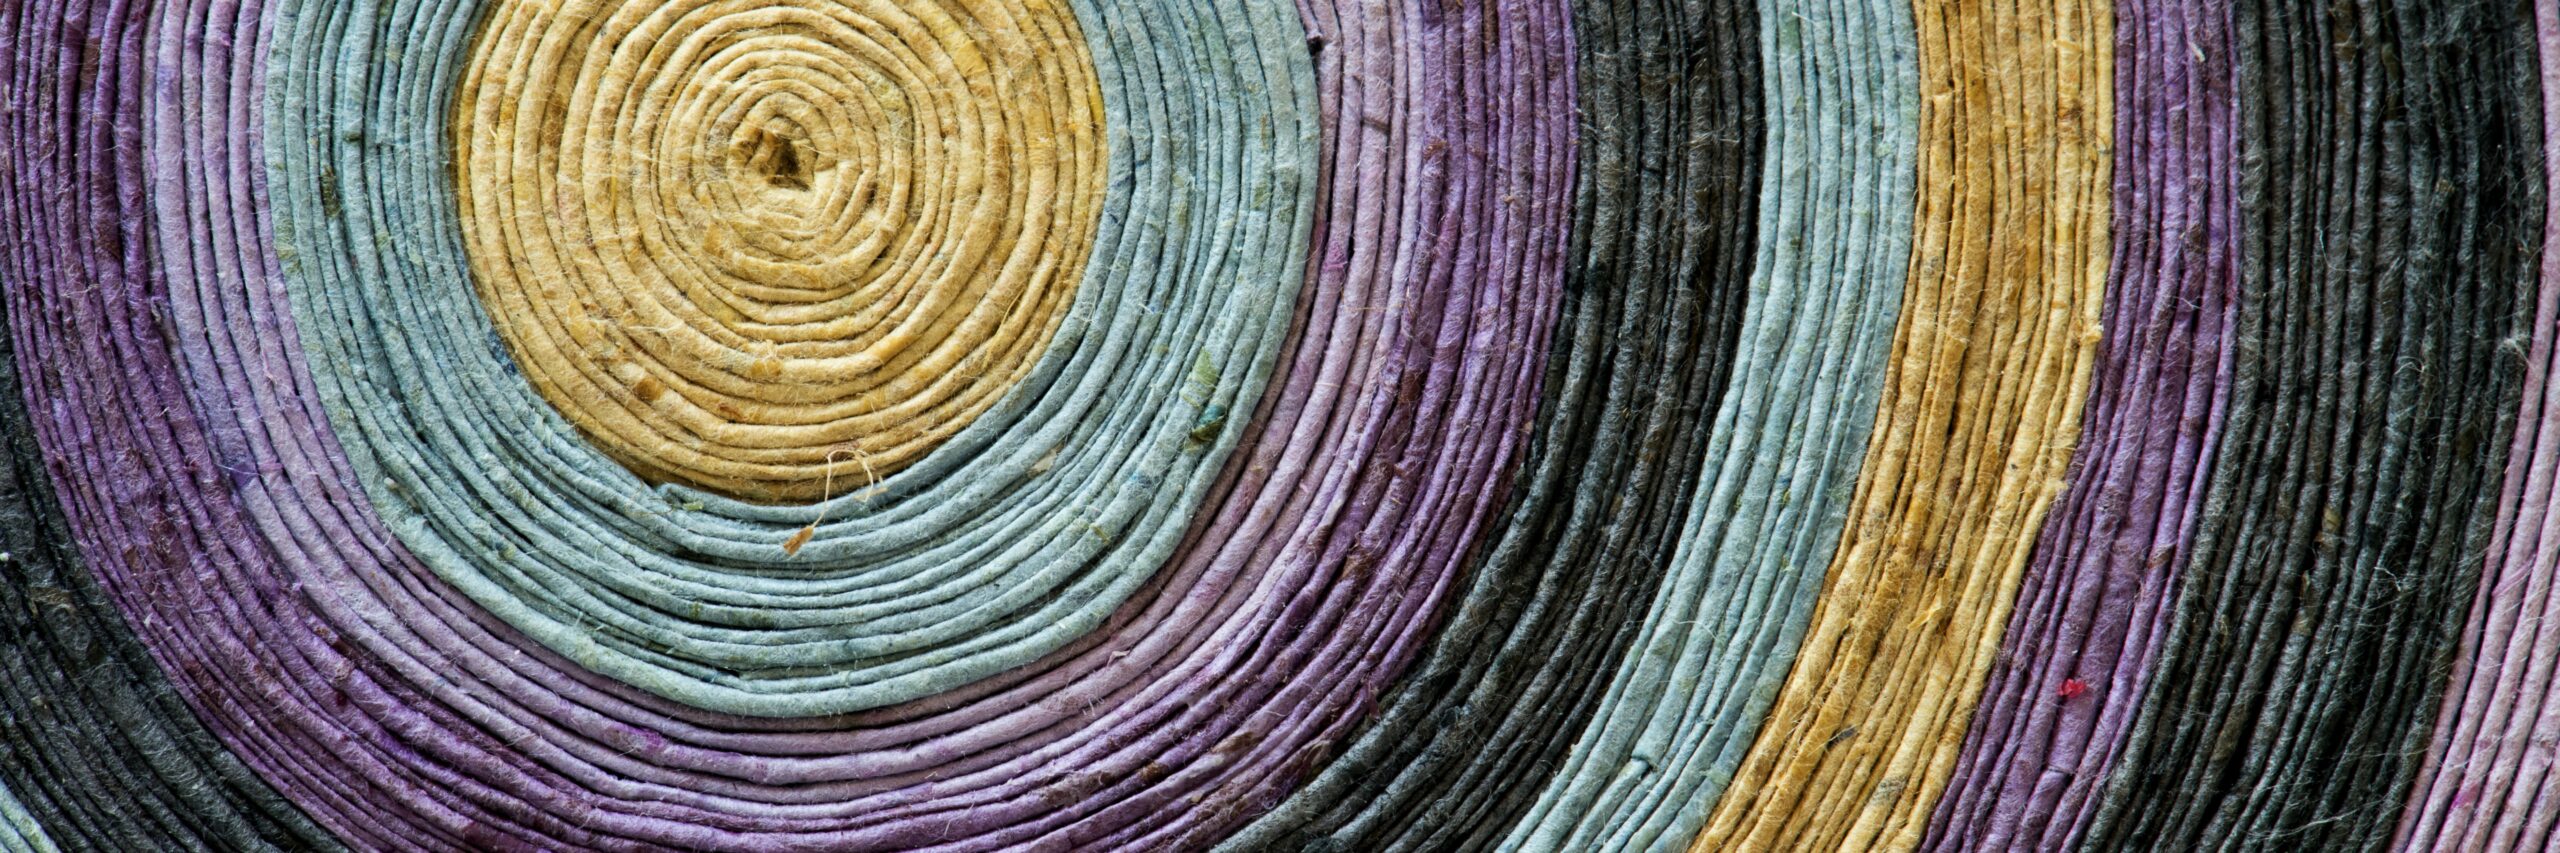 Close-up of textile art in a round shape. Colors include tan, blue, purple, black.